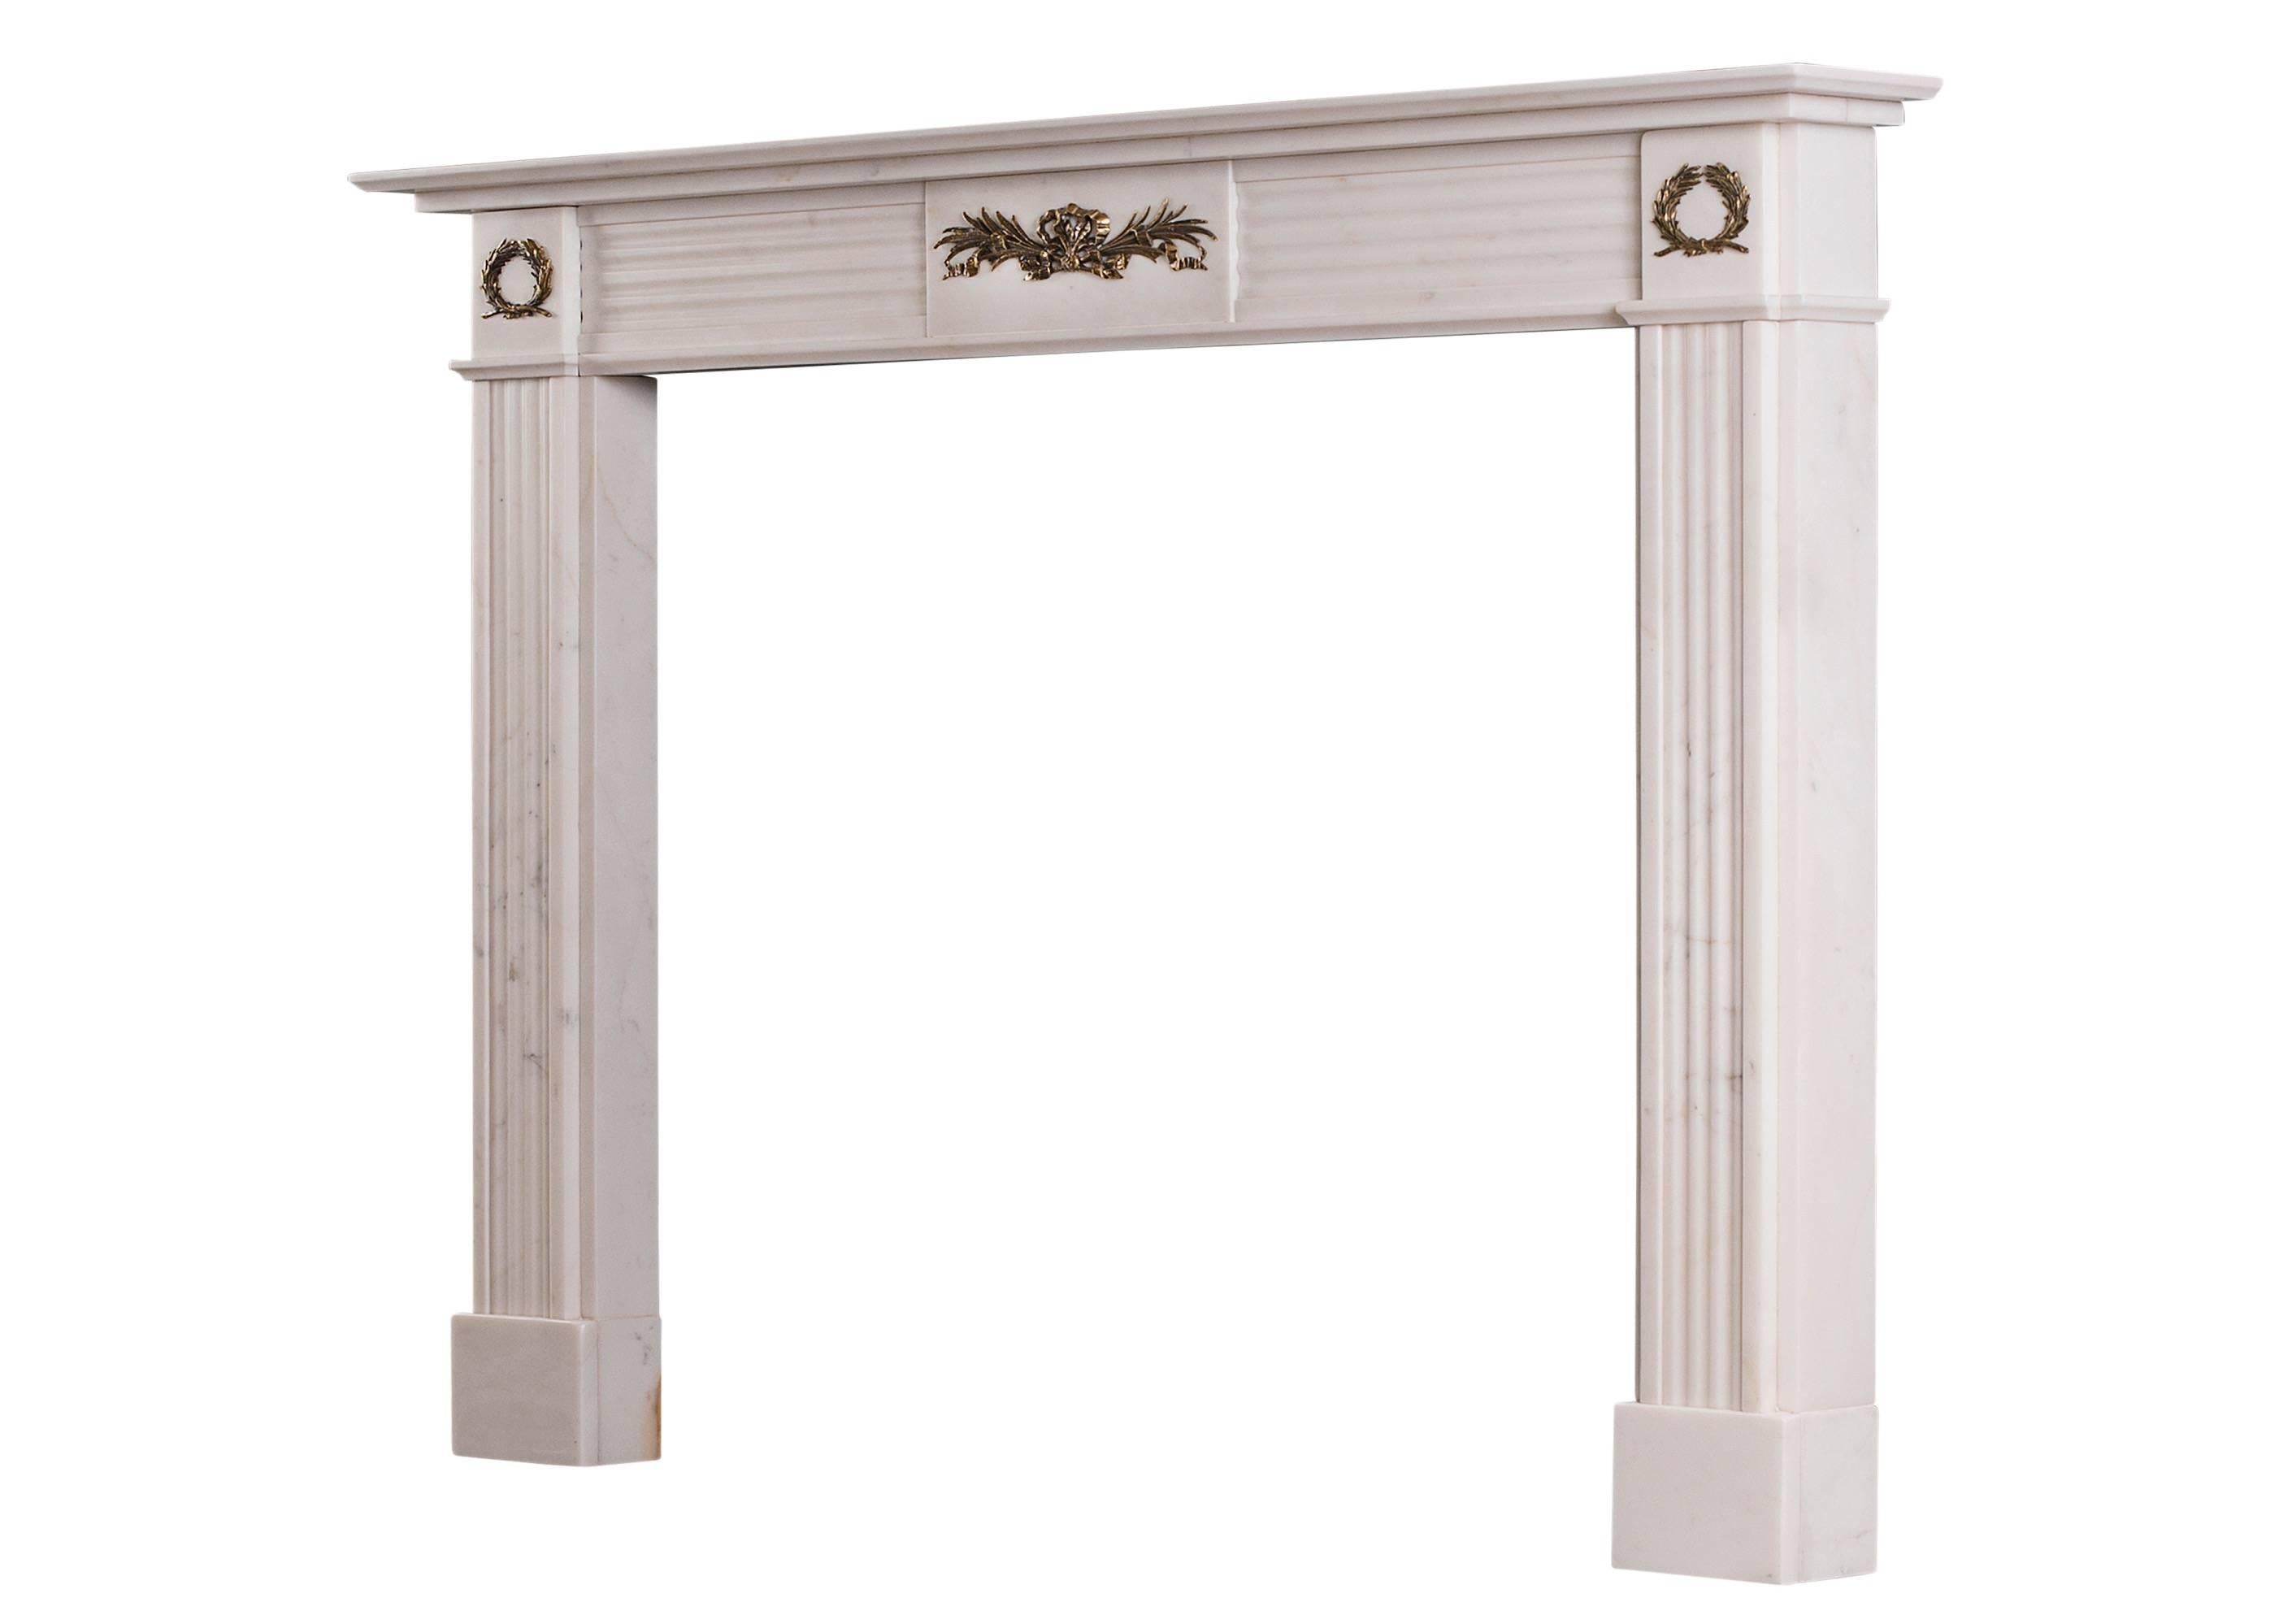 A statuary white marble fireplace in the Regency style. The reeded jambs surmounted by brass ormolu wreaths. The reeded frieze with centre plaque featuring ormolu adornment of tied foliage and cascading ribbons. English, 20th century.

Shelf